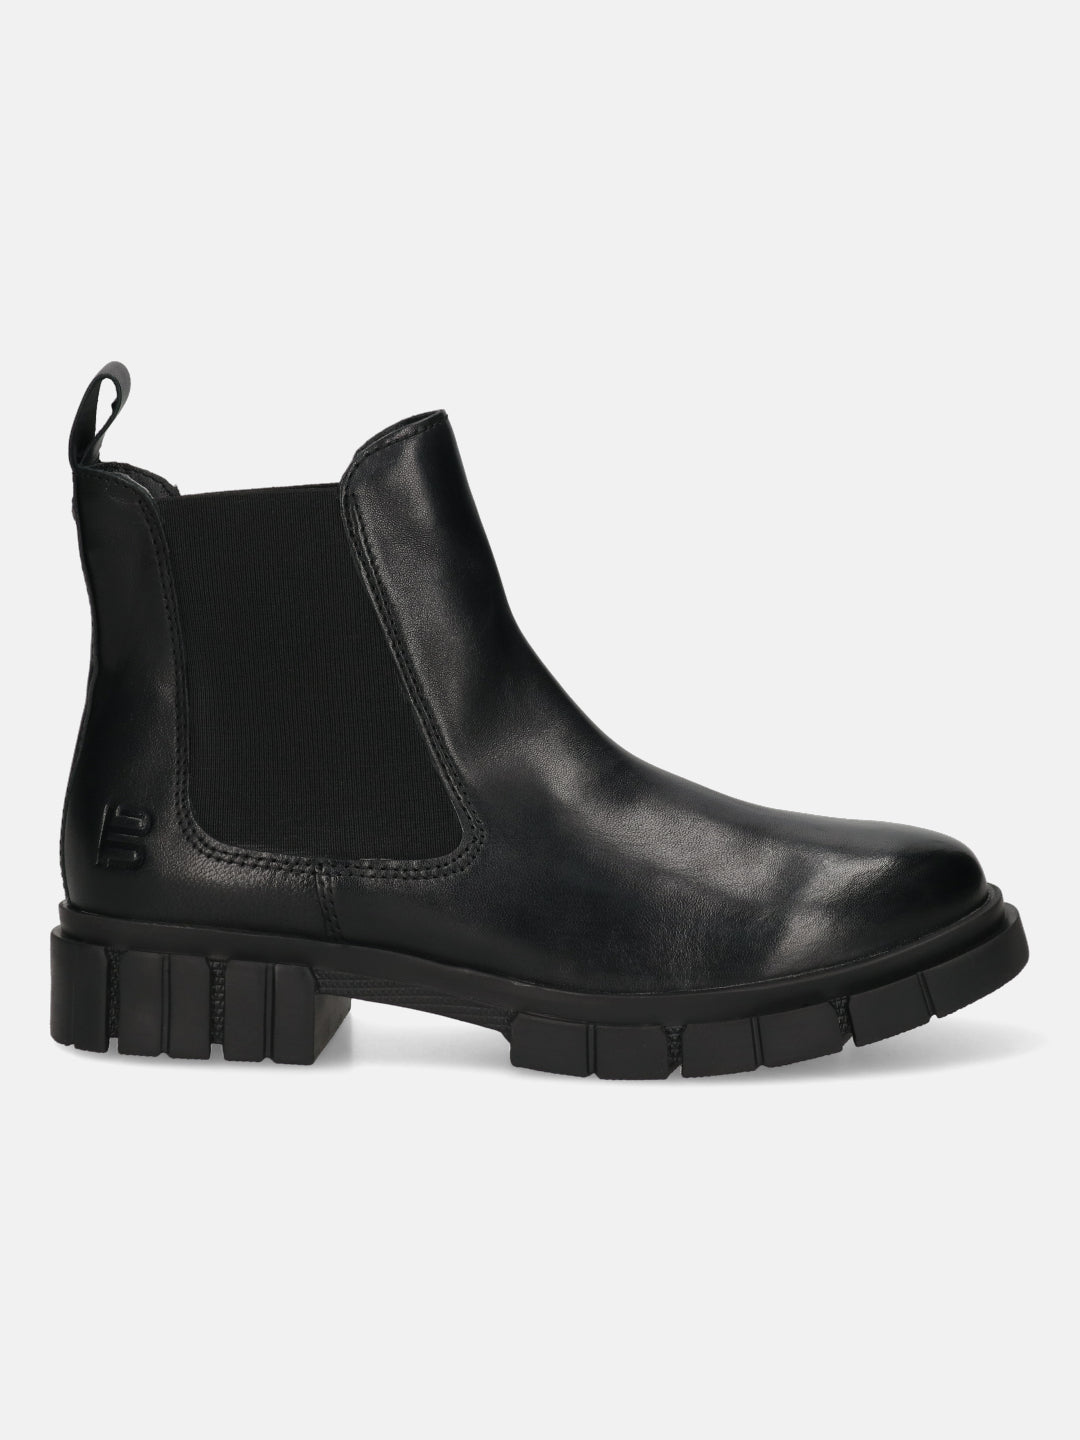 Fiona Black Leather Chelsea Boots